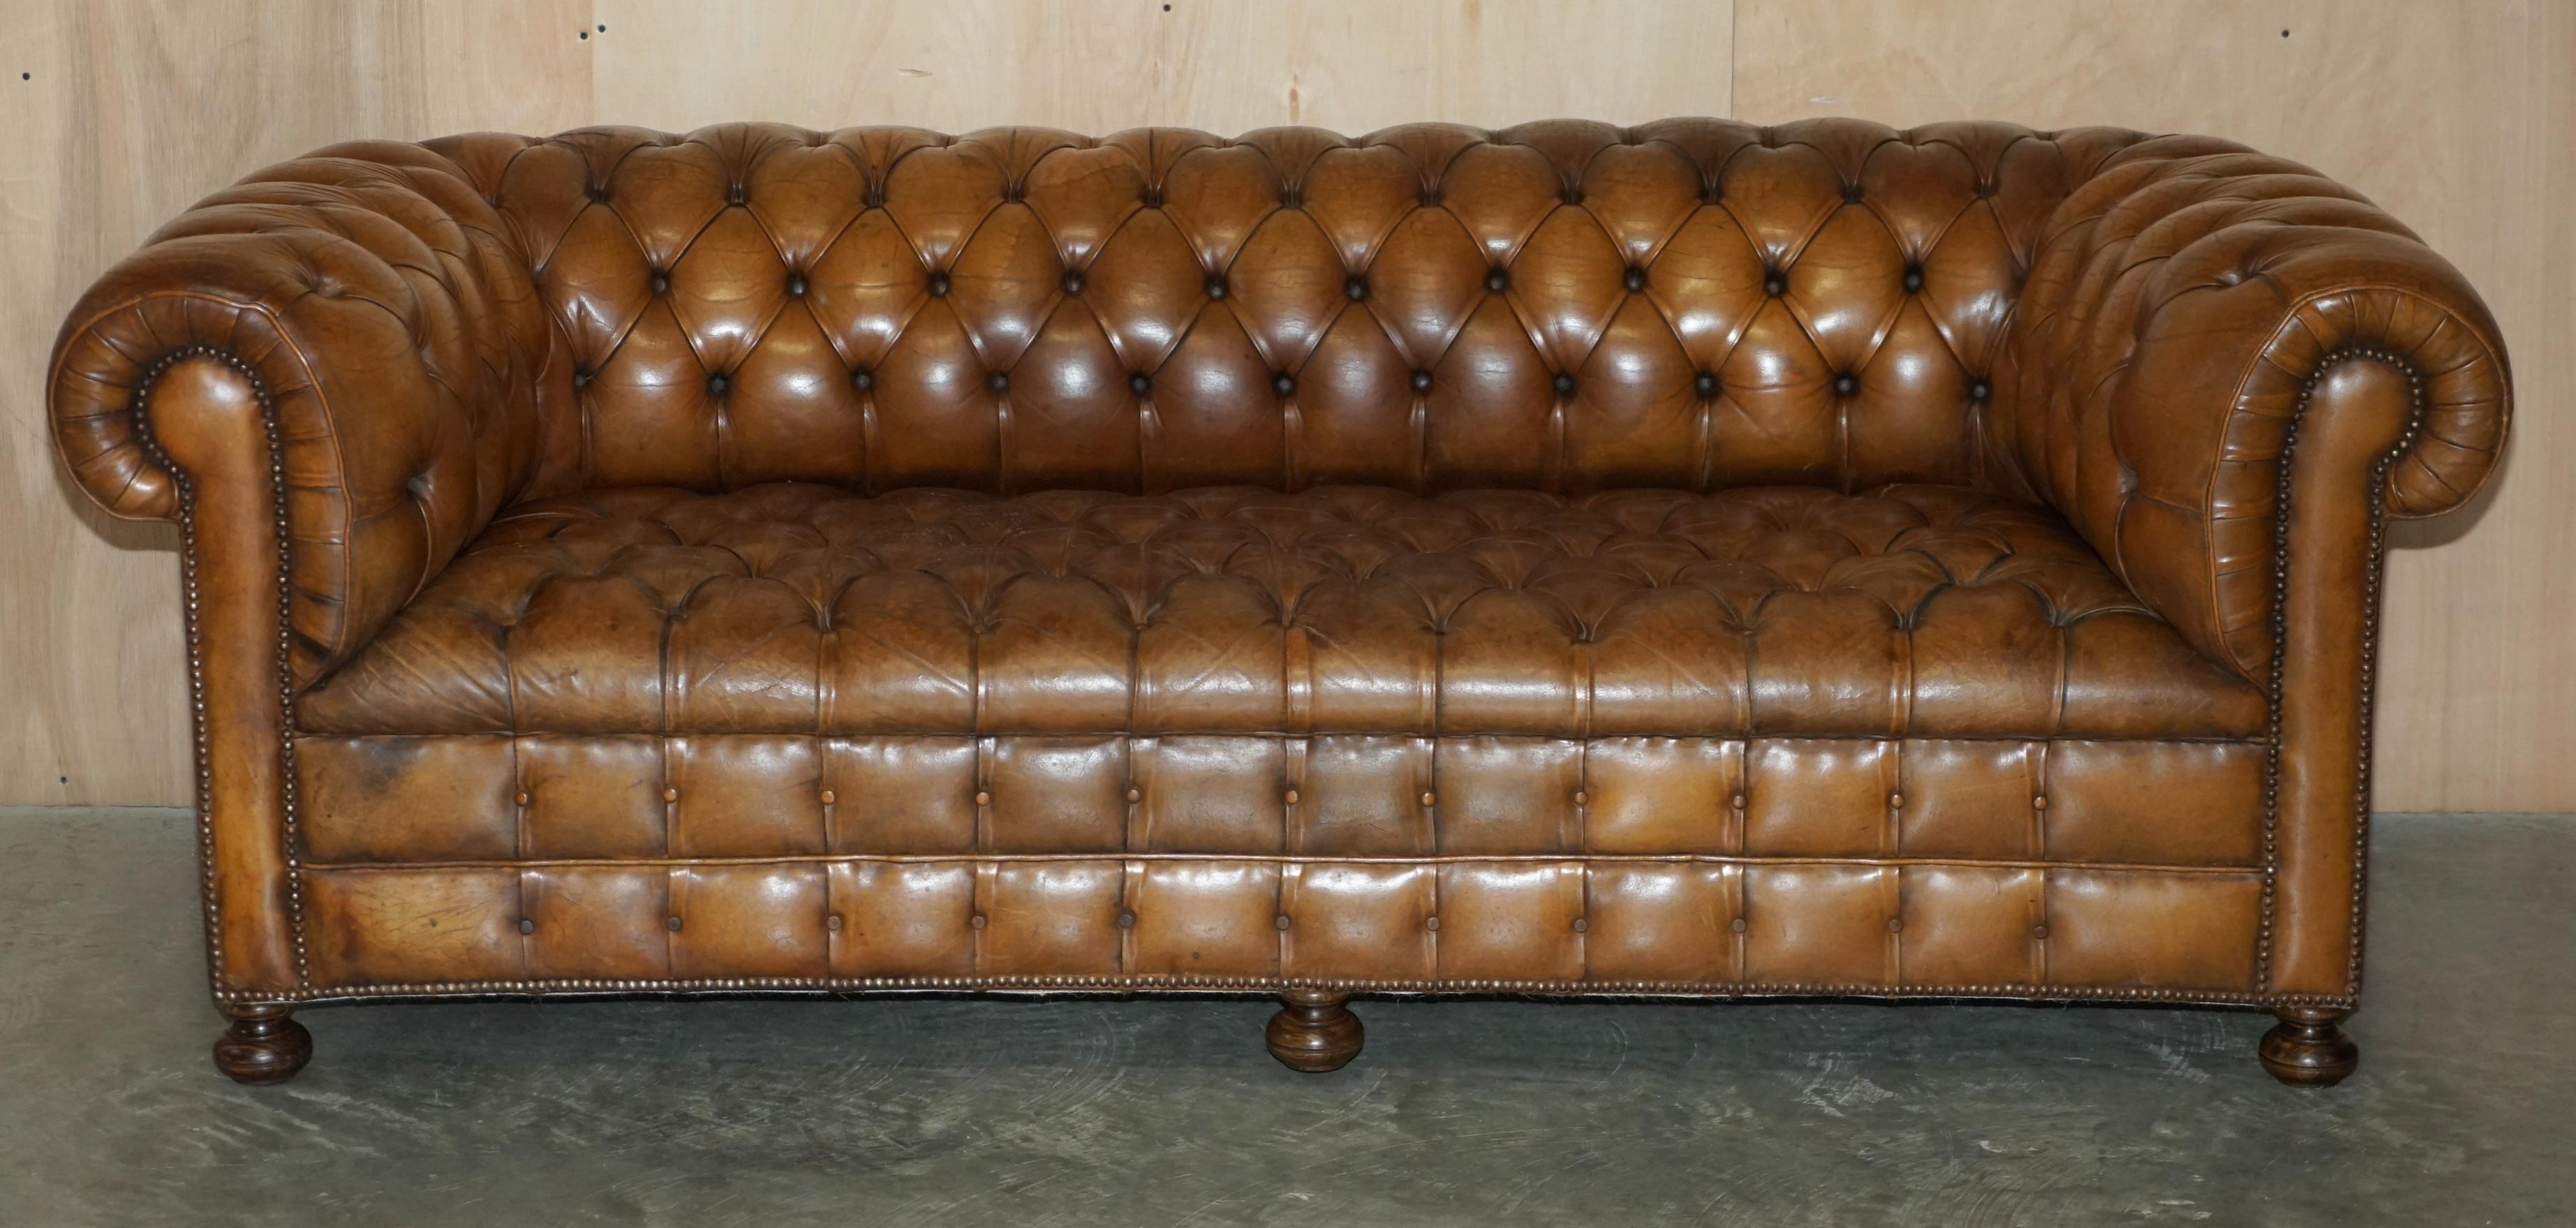 We are delighted to offer for sale this original 1950’s cigar brown leather Chesterfield club sofa in lightly restored condition with fully buttoned base and solid walnut turned feet.

This is a really very rare find, you almost never come across